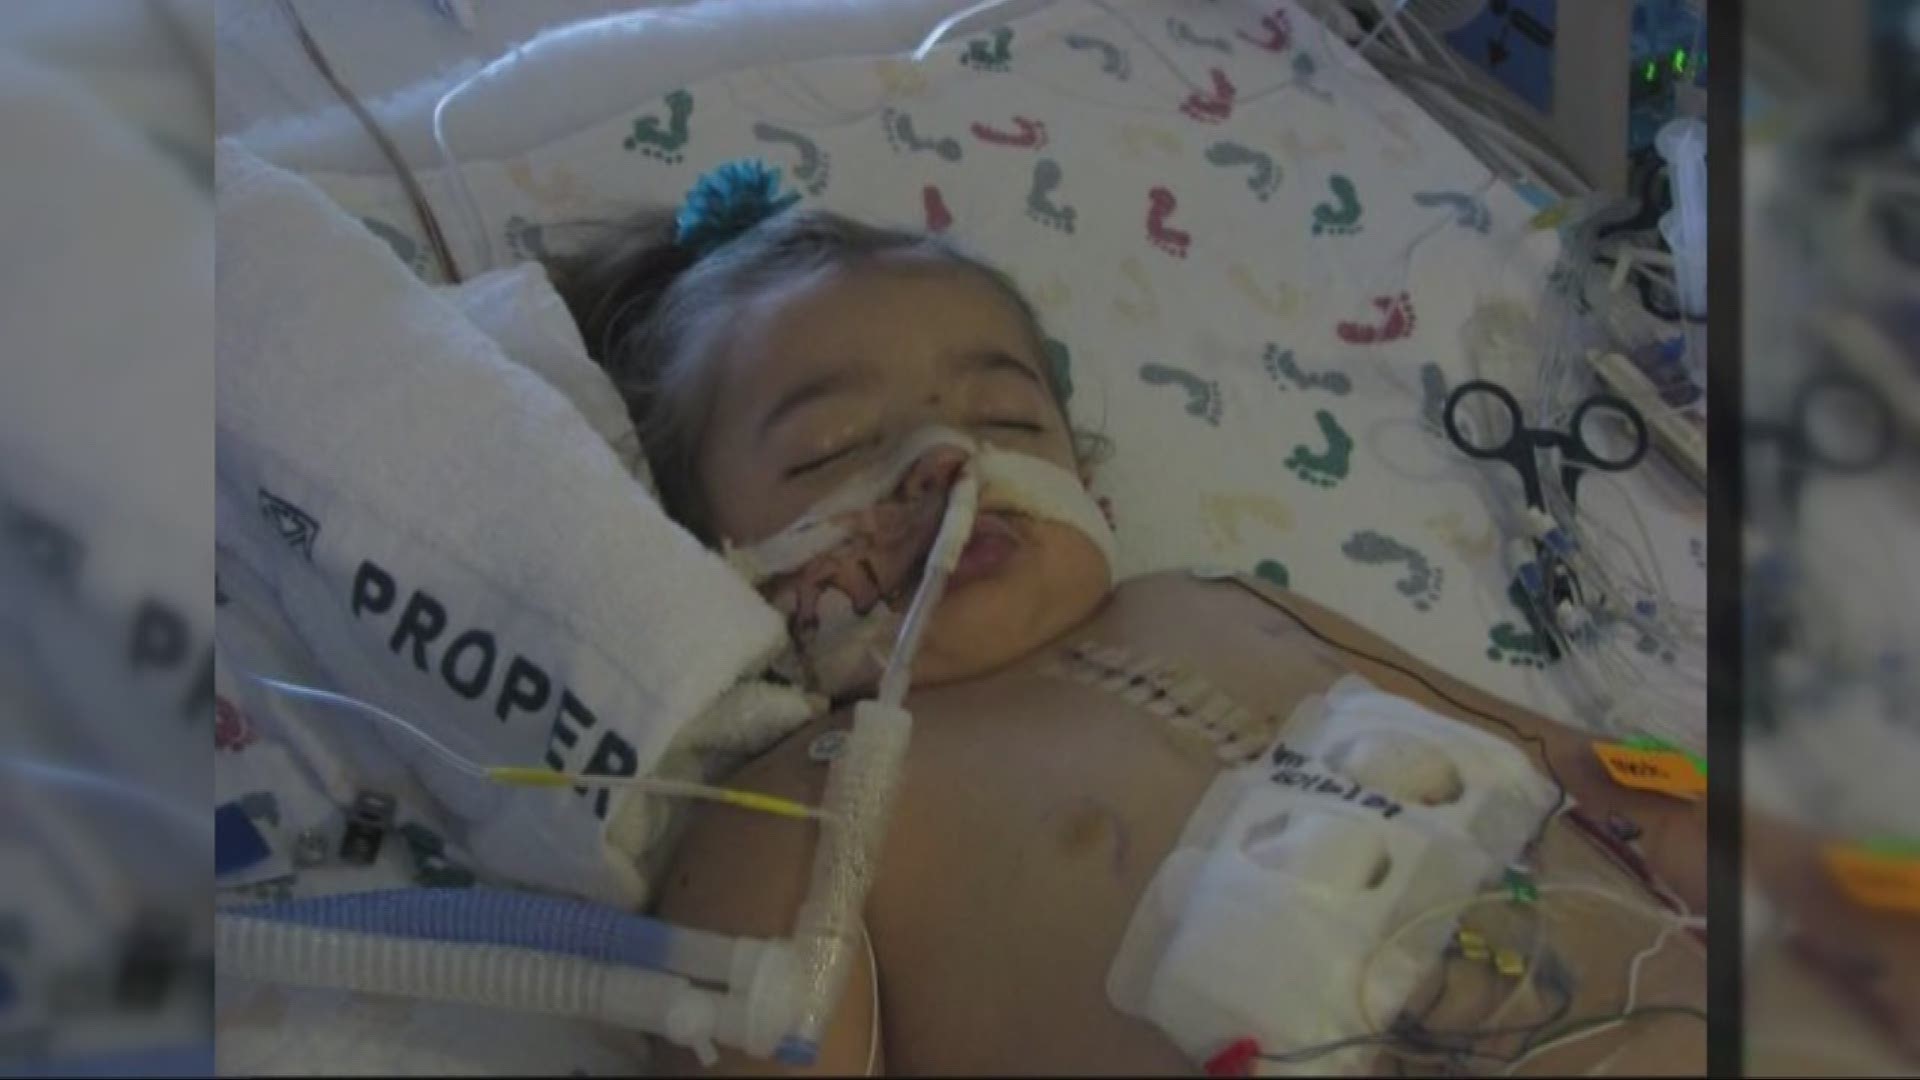 #HeartLove: Miracles and medicine working together for Md. girl